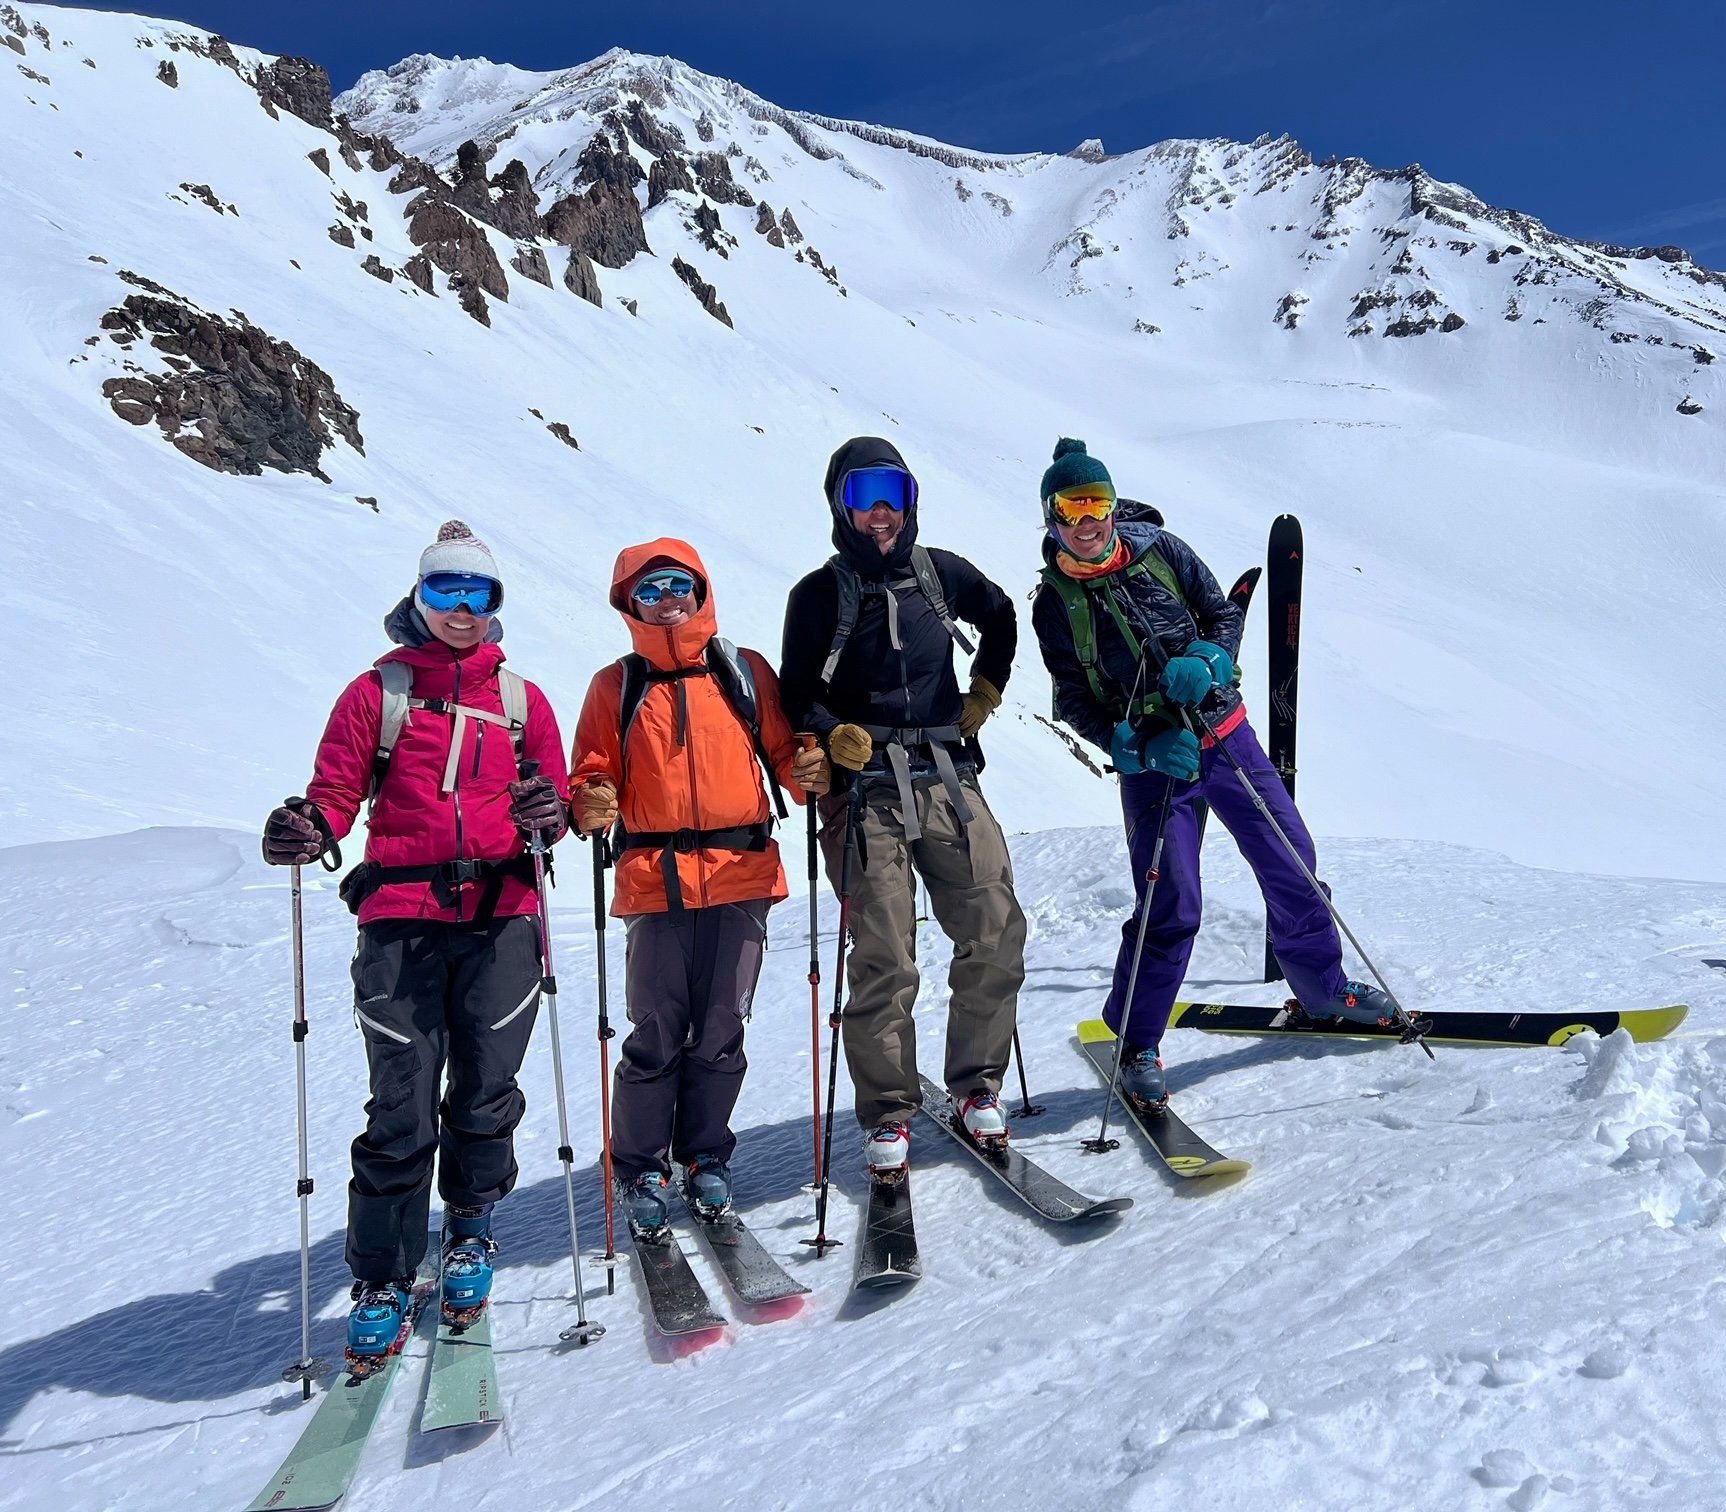 Skiers pose together during the womens ski mountaineering course